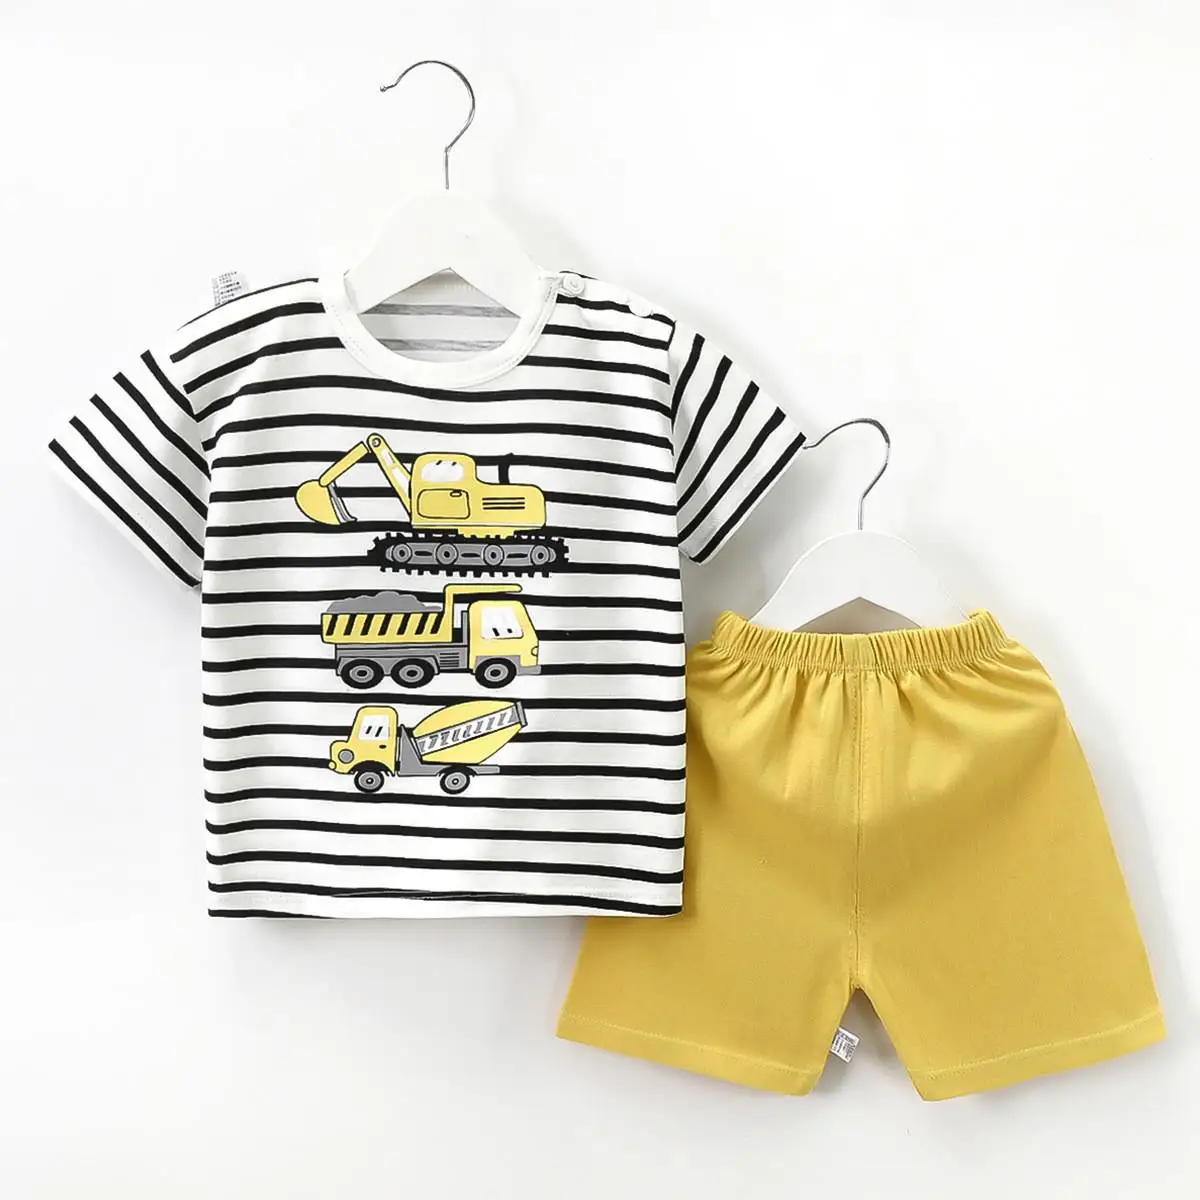 0-4years  Chirldren Summer Outfits T-shirt+shorts Boys And Girls  Loose Casual Cartoon Clothes Stripe O-neck 2pcs Sets Simple newborn baby clothing set Baby Clothing Set